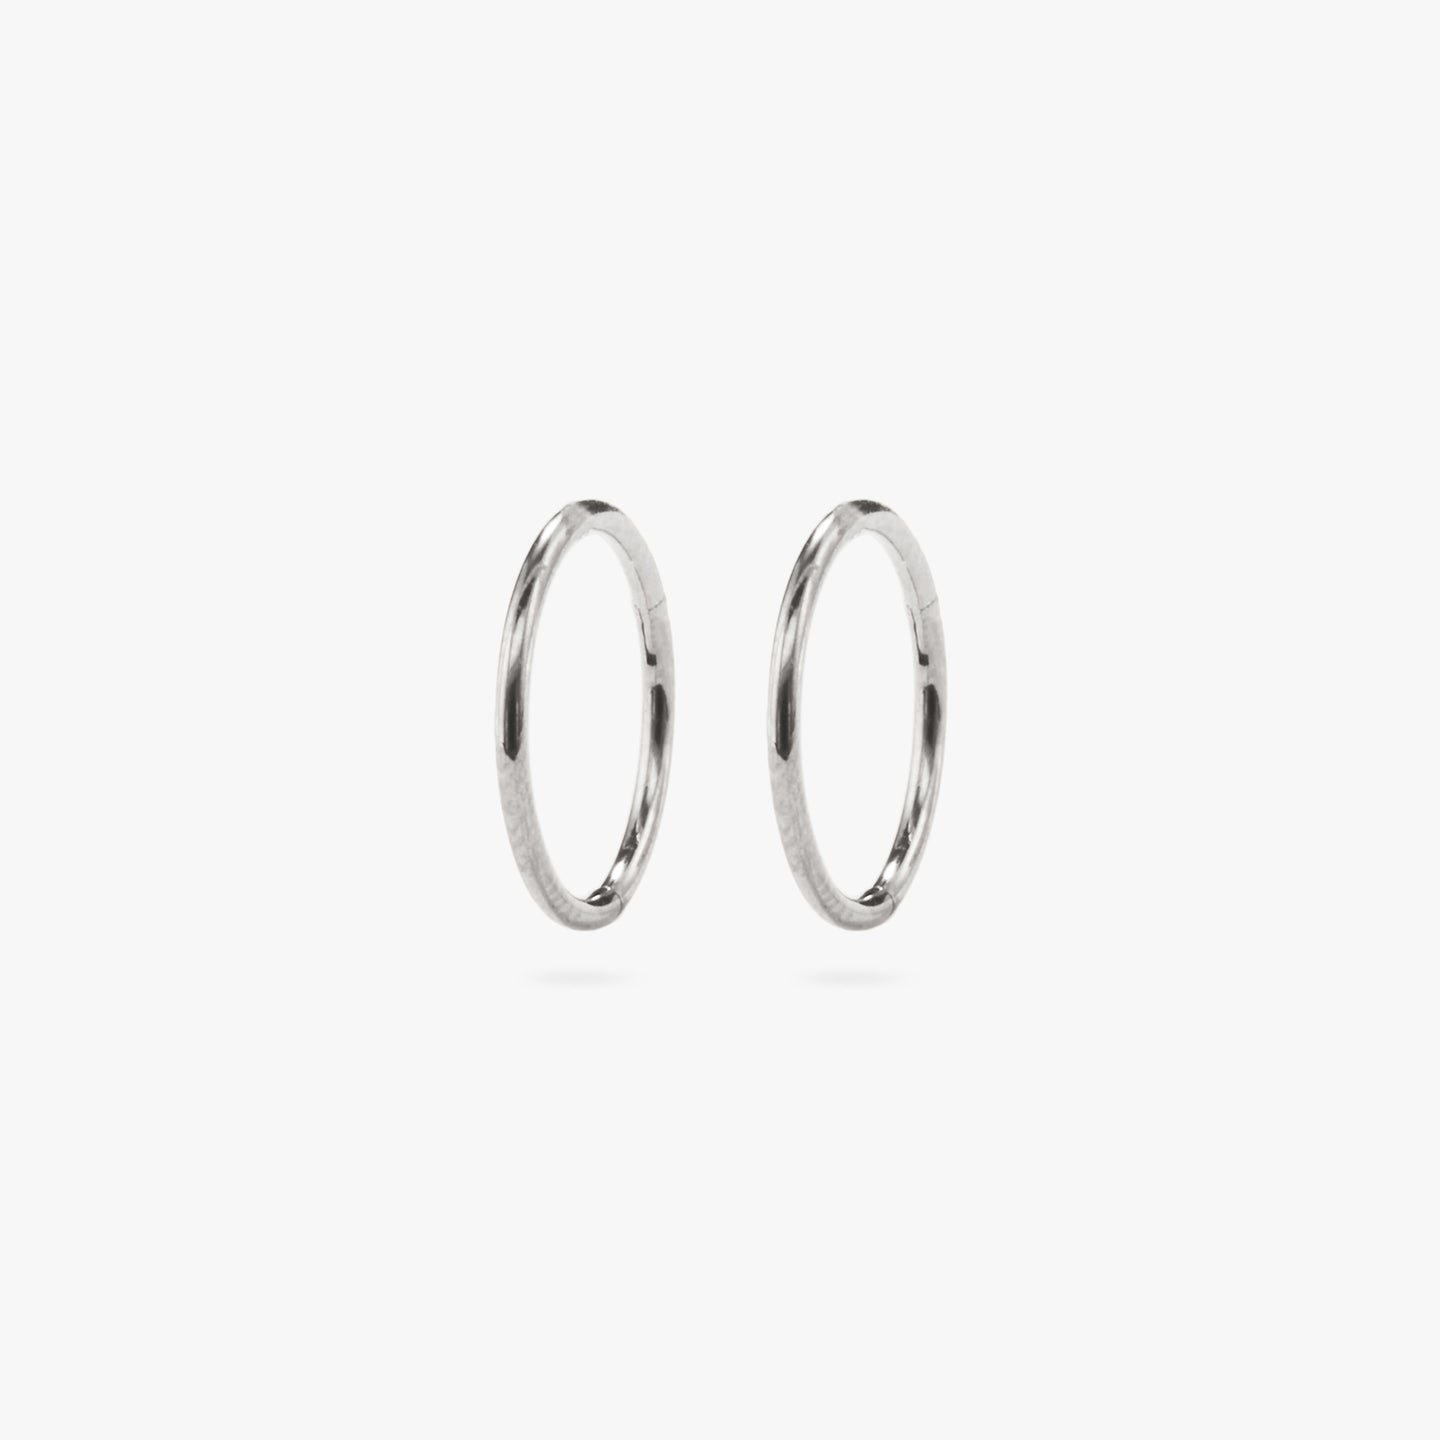 This is a silver clicker earring [pair] color:null|silver